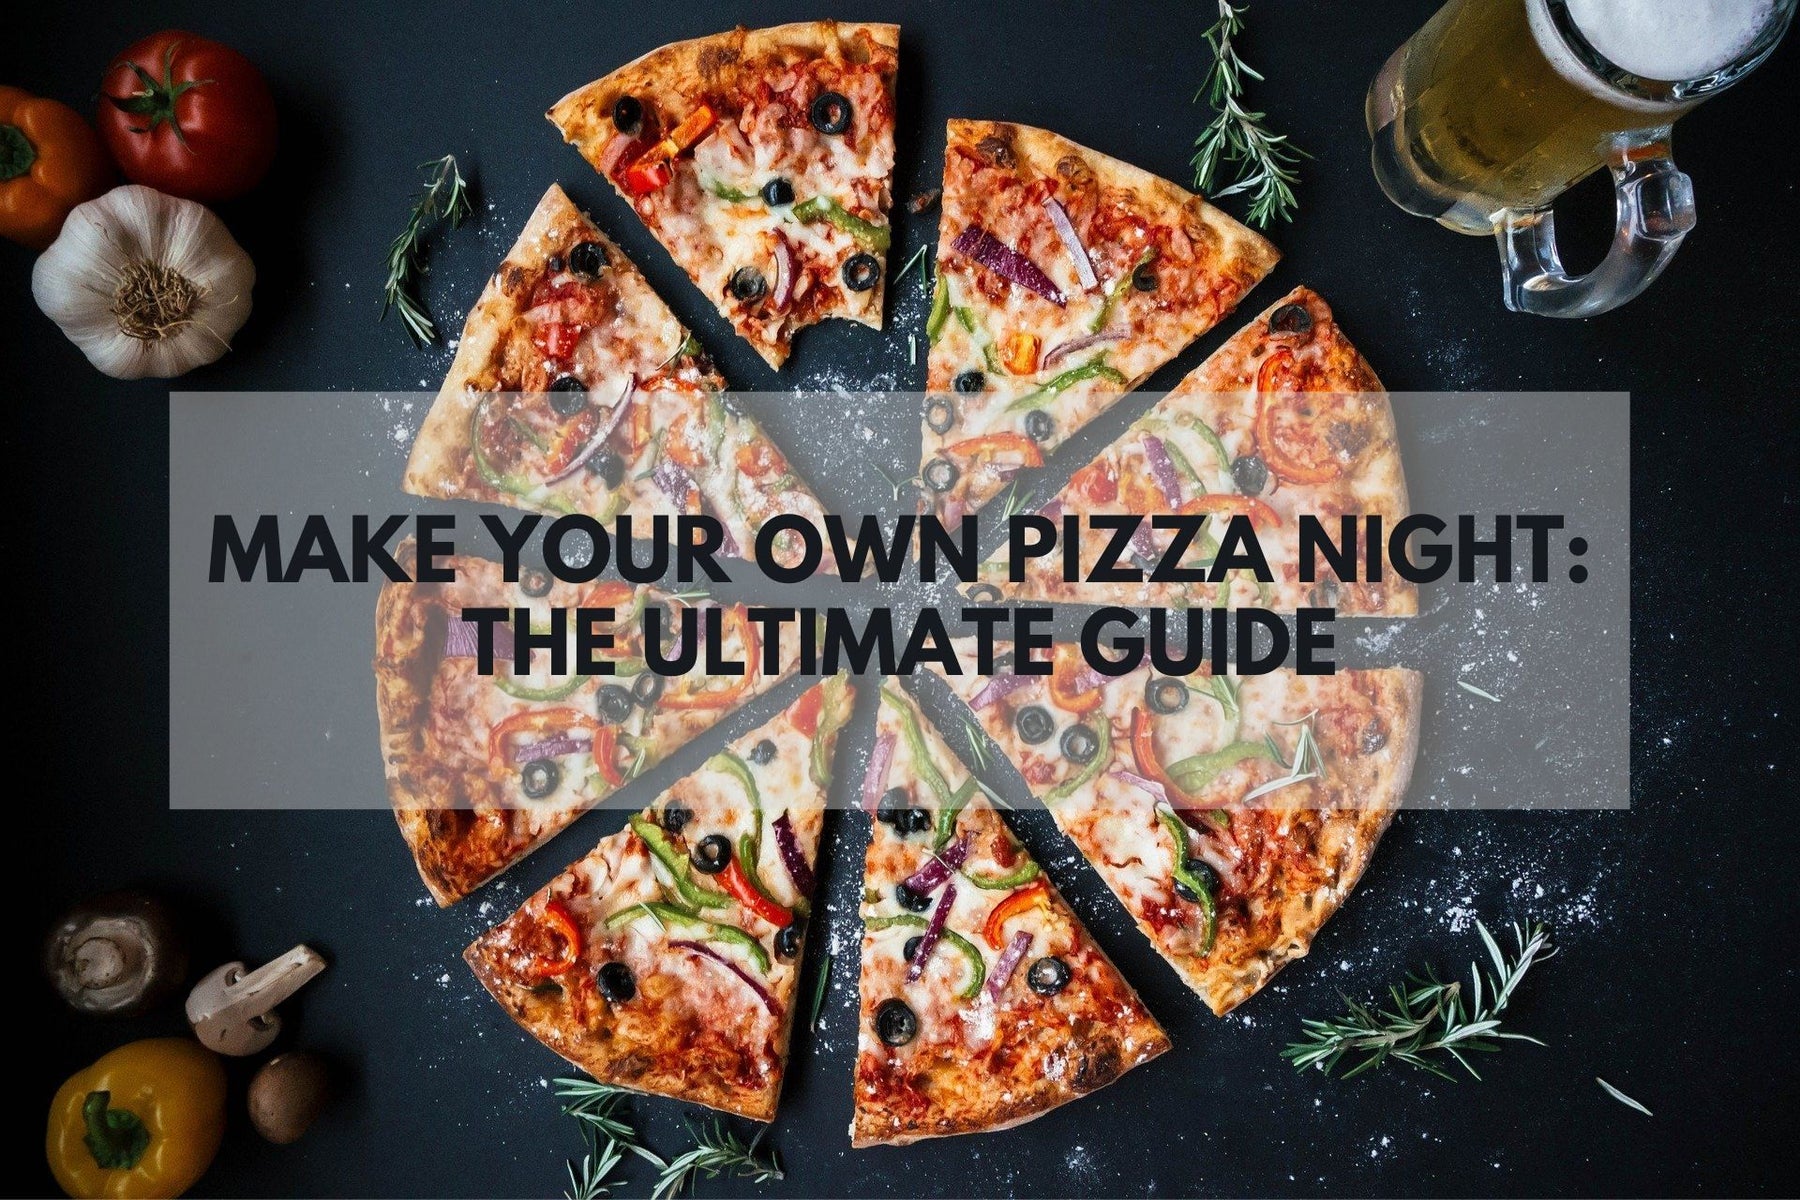 Pizza - Make Your Own Pizza Night: The Ultimate Guide